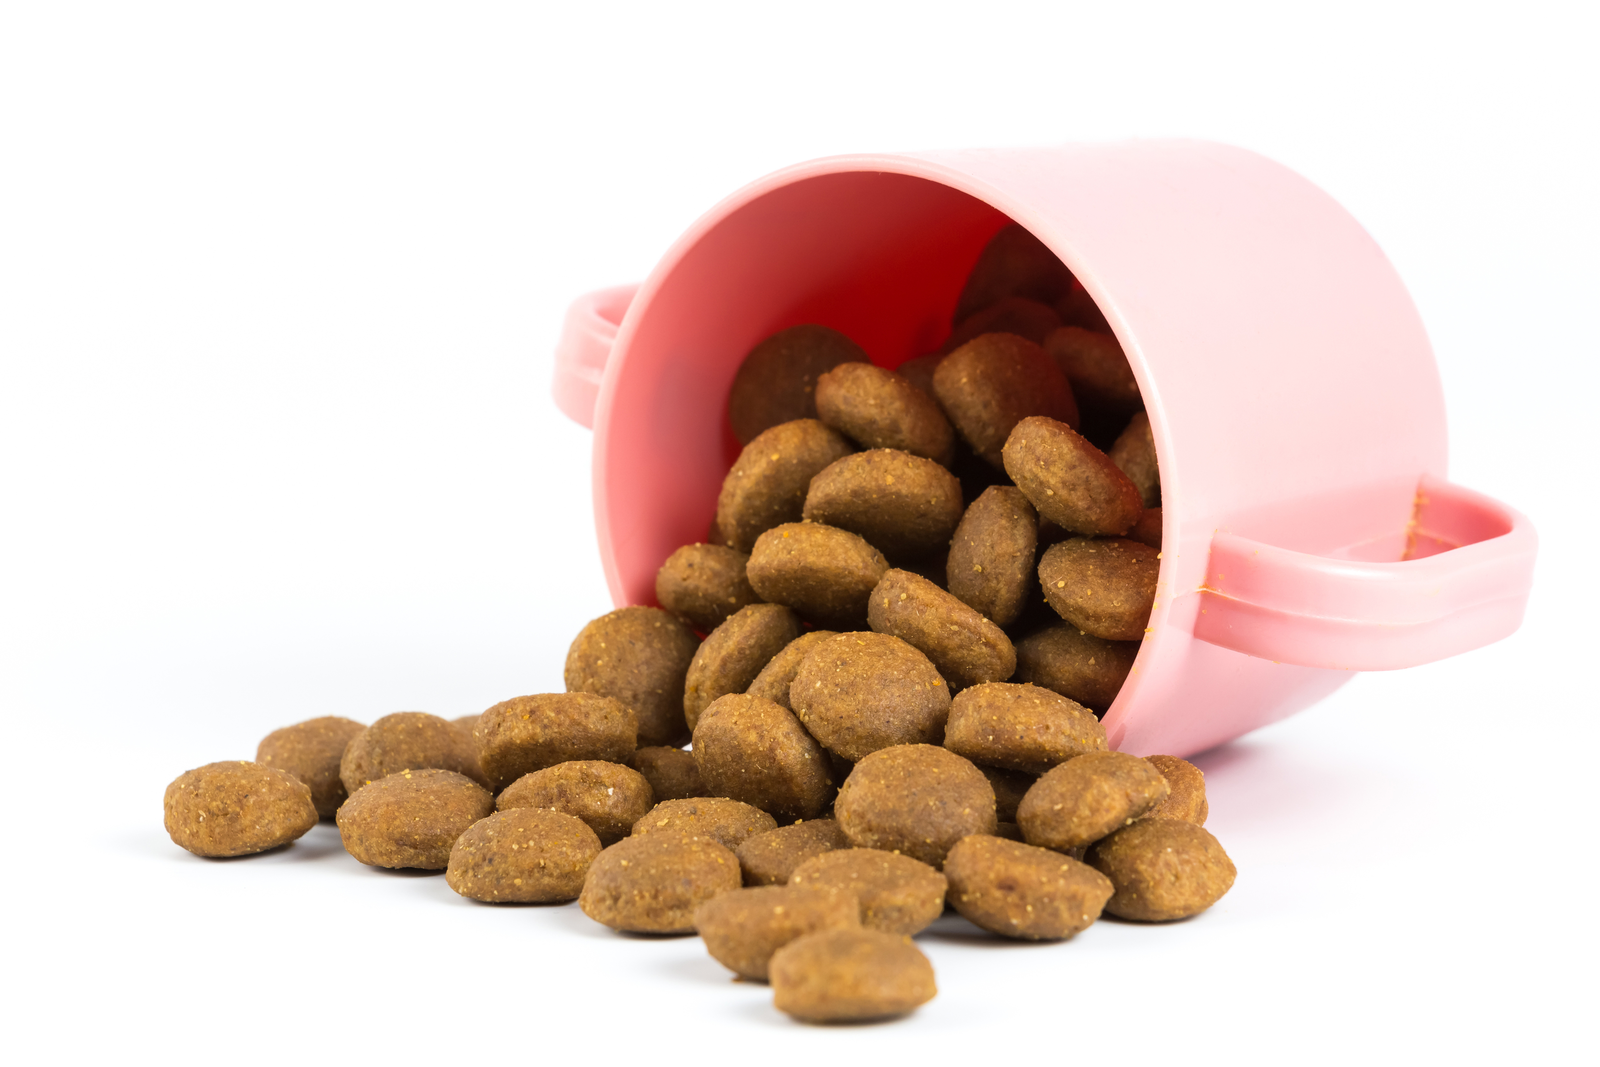 The positive effects of butyrate can be achieved by adding fermentable fibre to the pet diet.